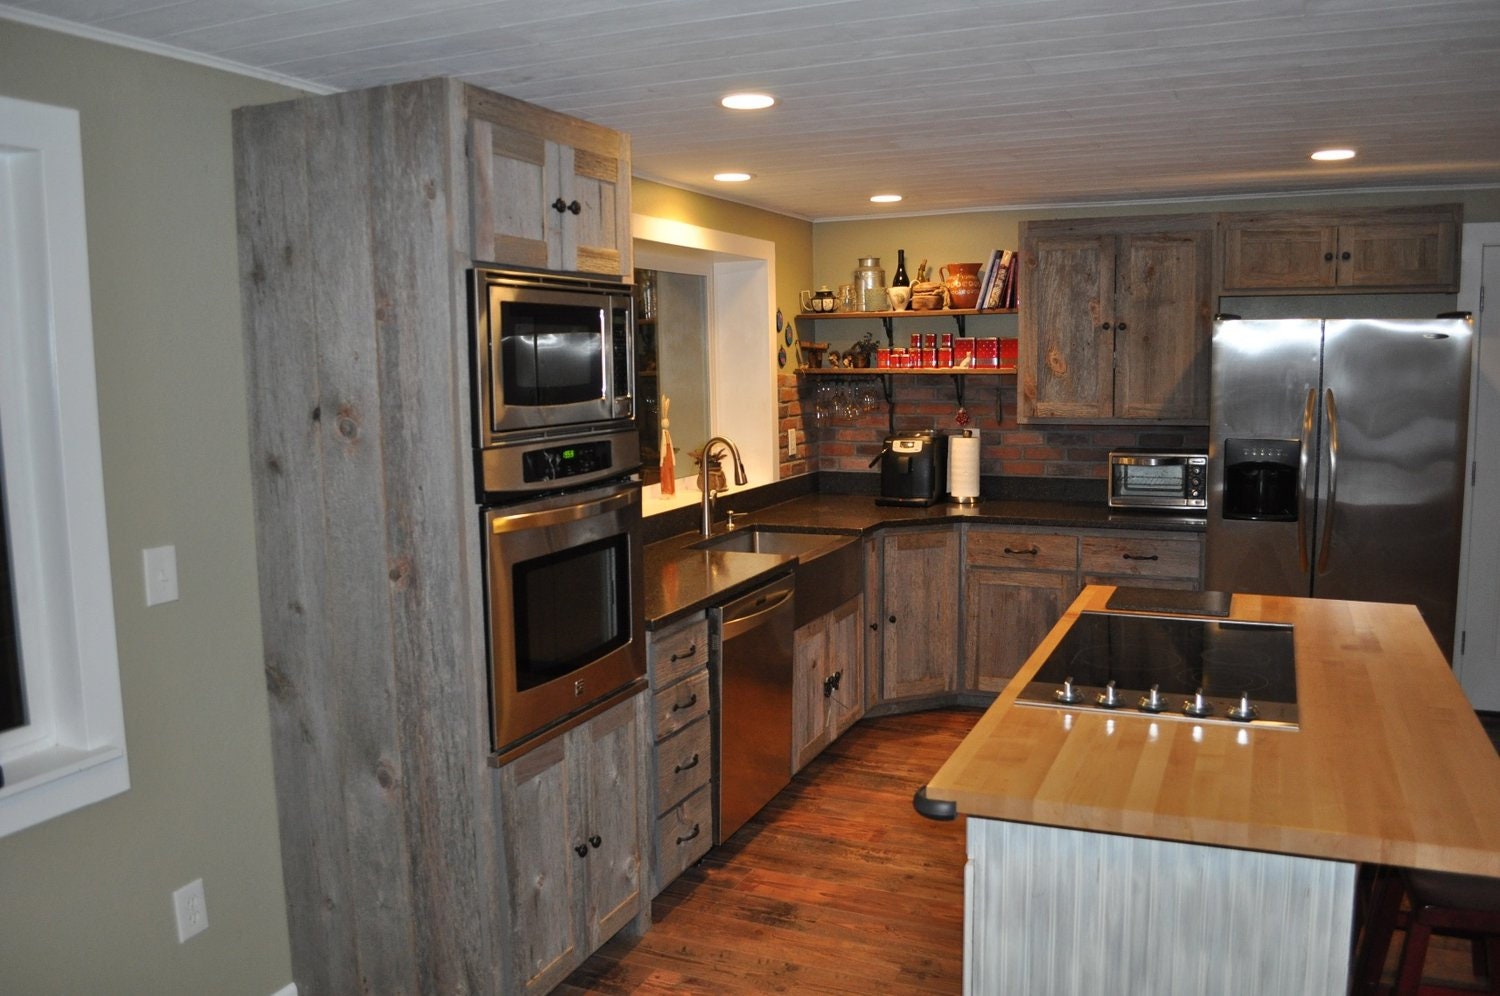 Reclaimed Wood Kitchen Cabinets in Weathered Gray   Etsy